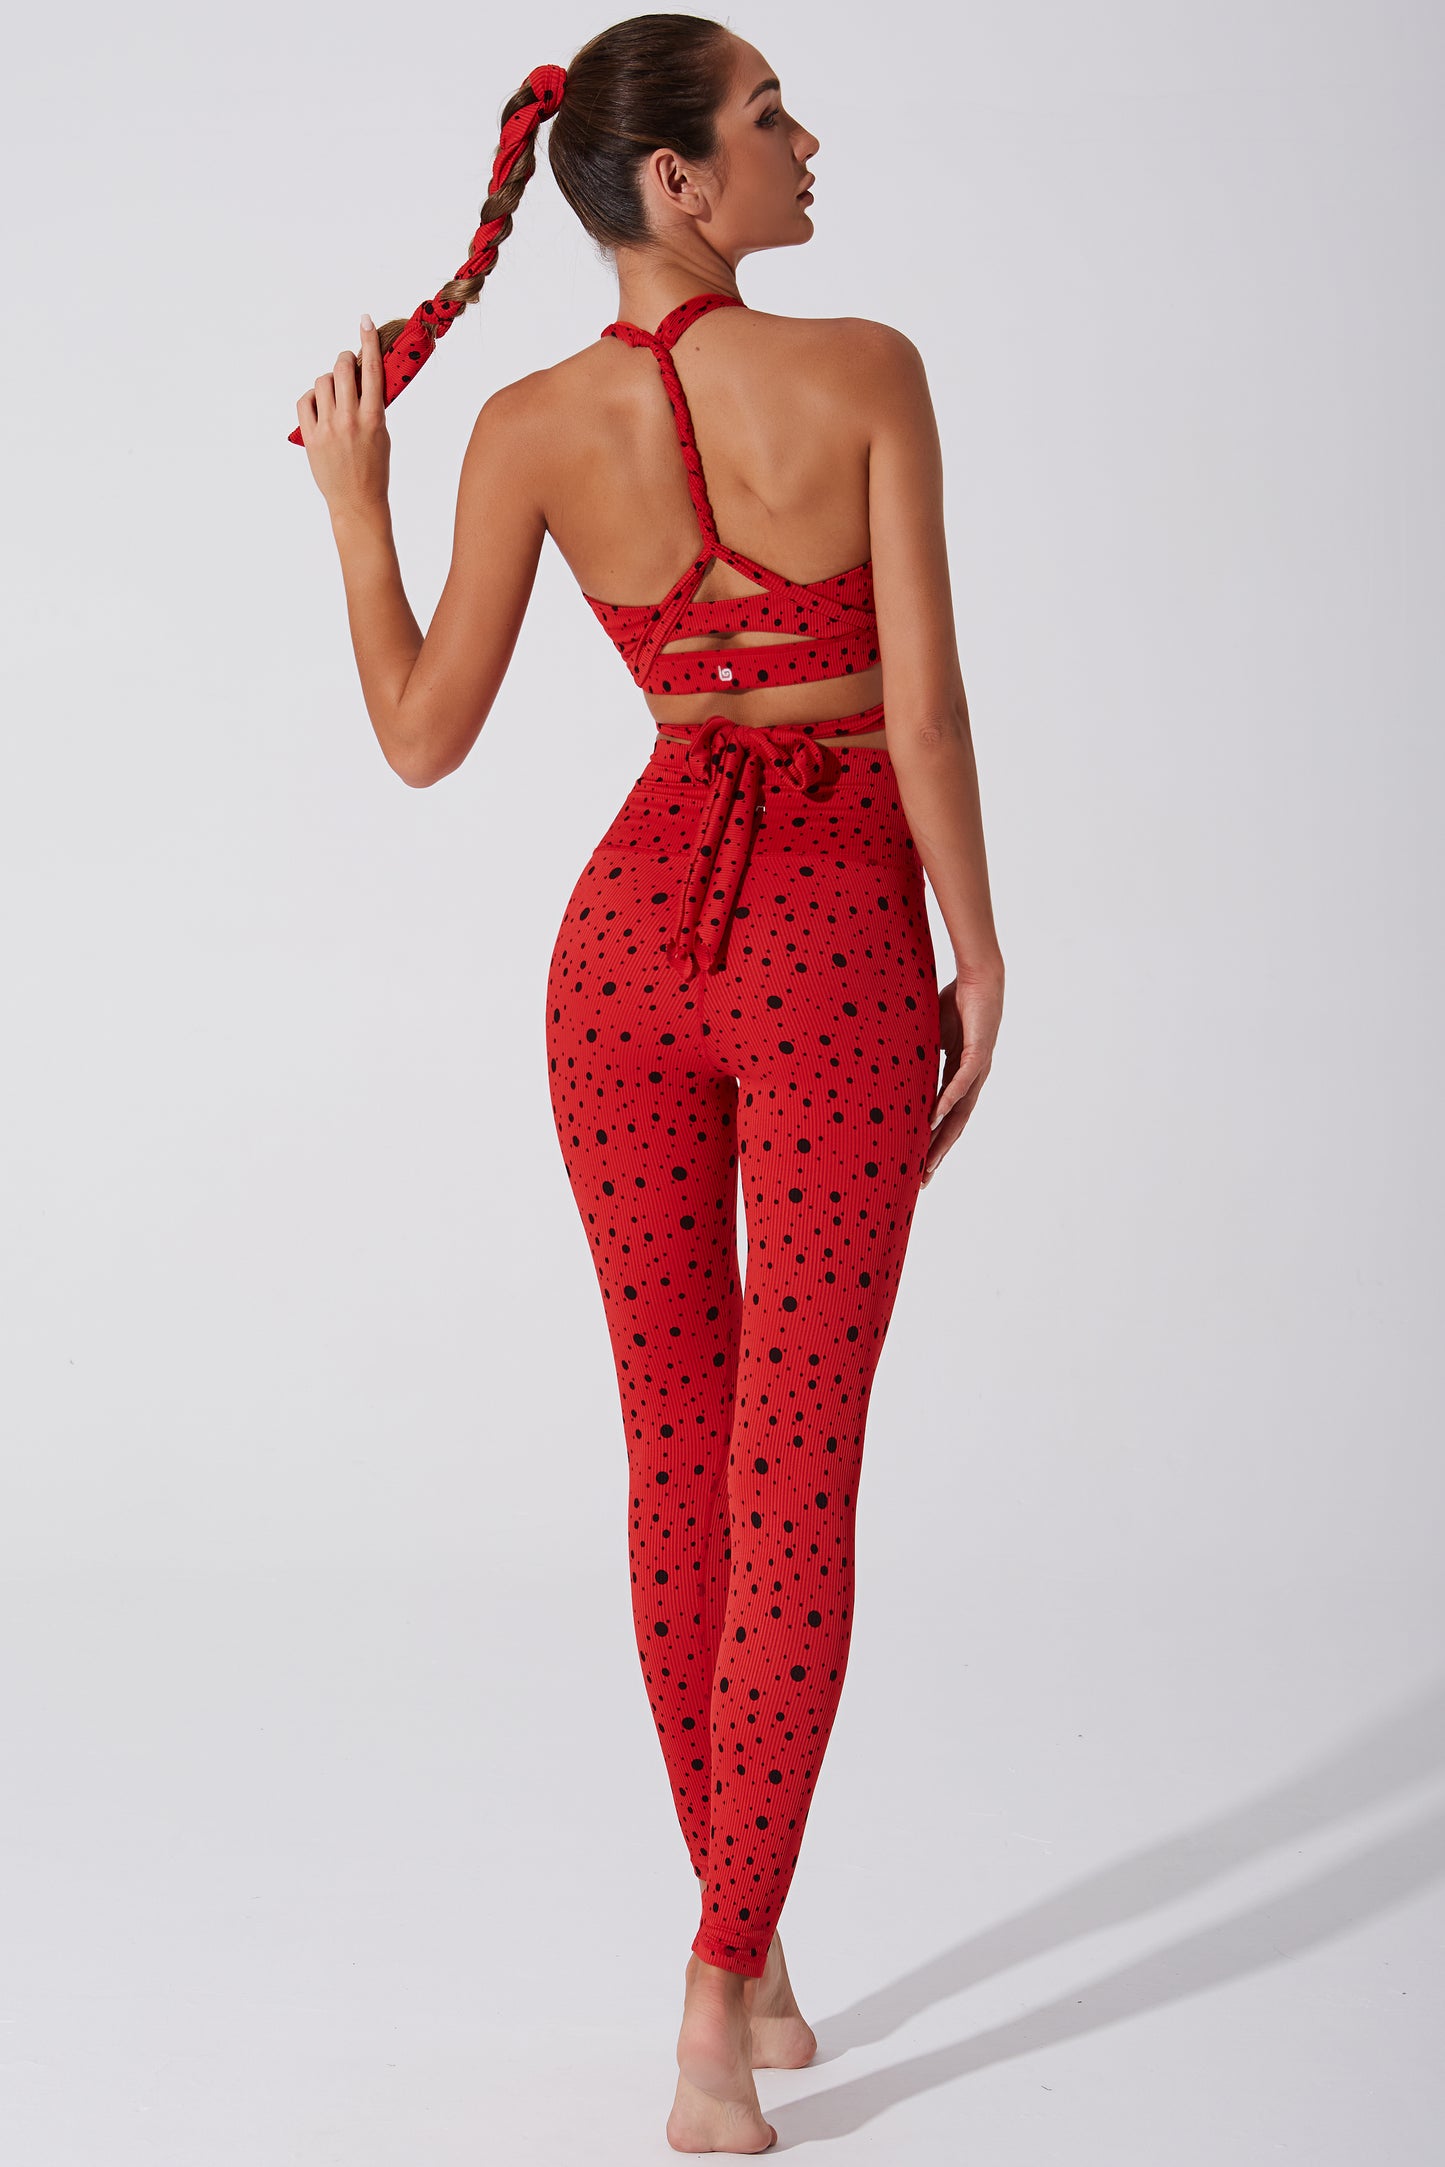 Vibrant red polka dot leggings for women with a playful beetle design - OW-0023-WLG-OR.